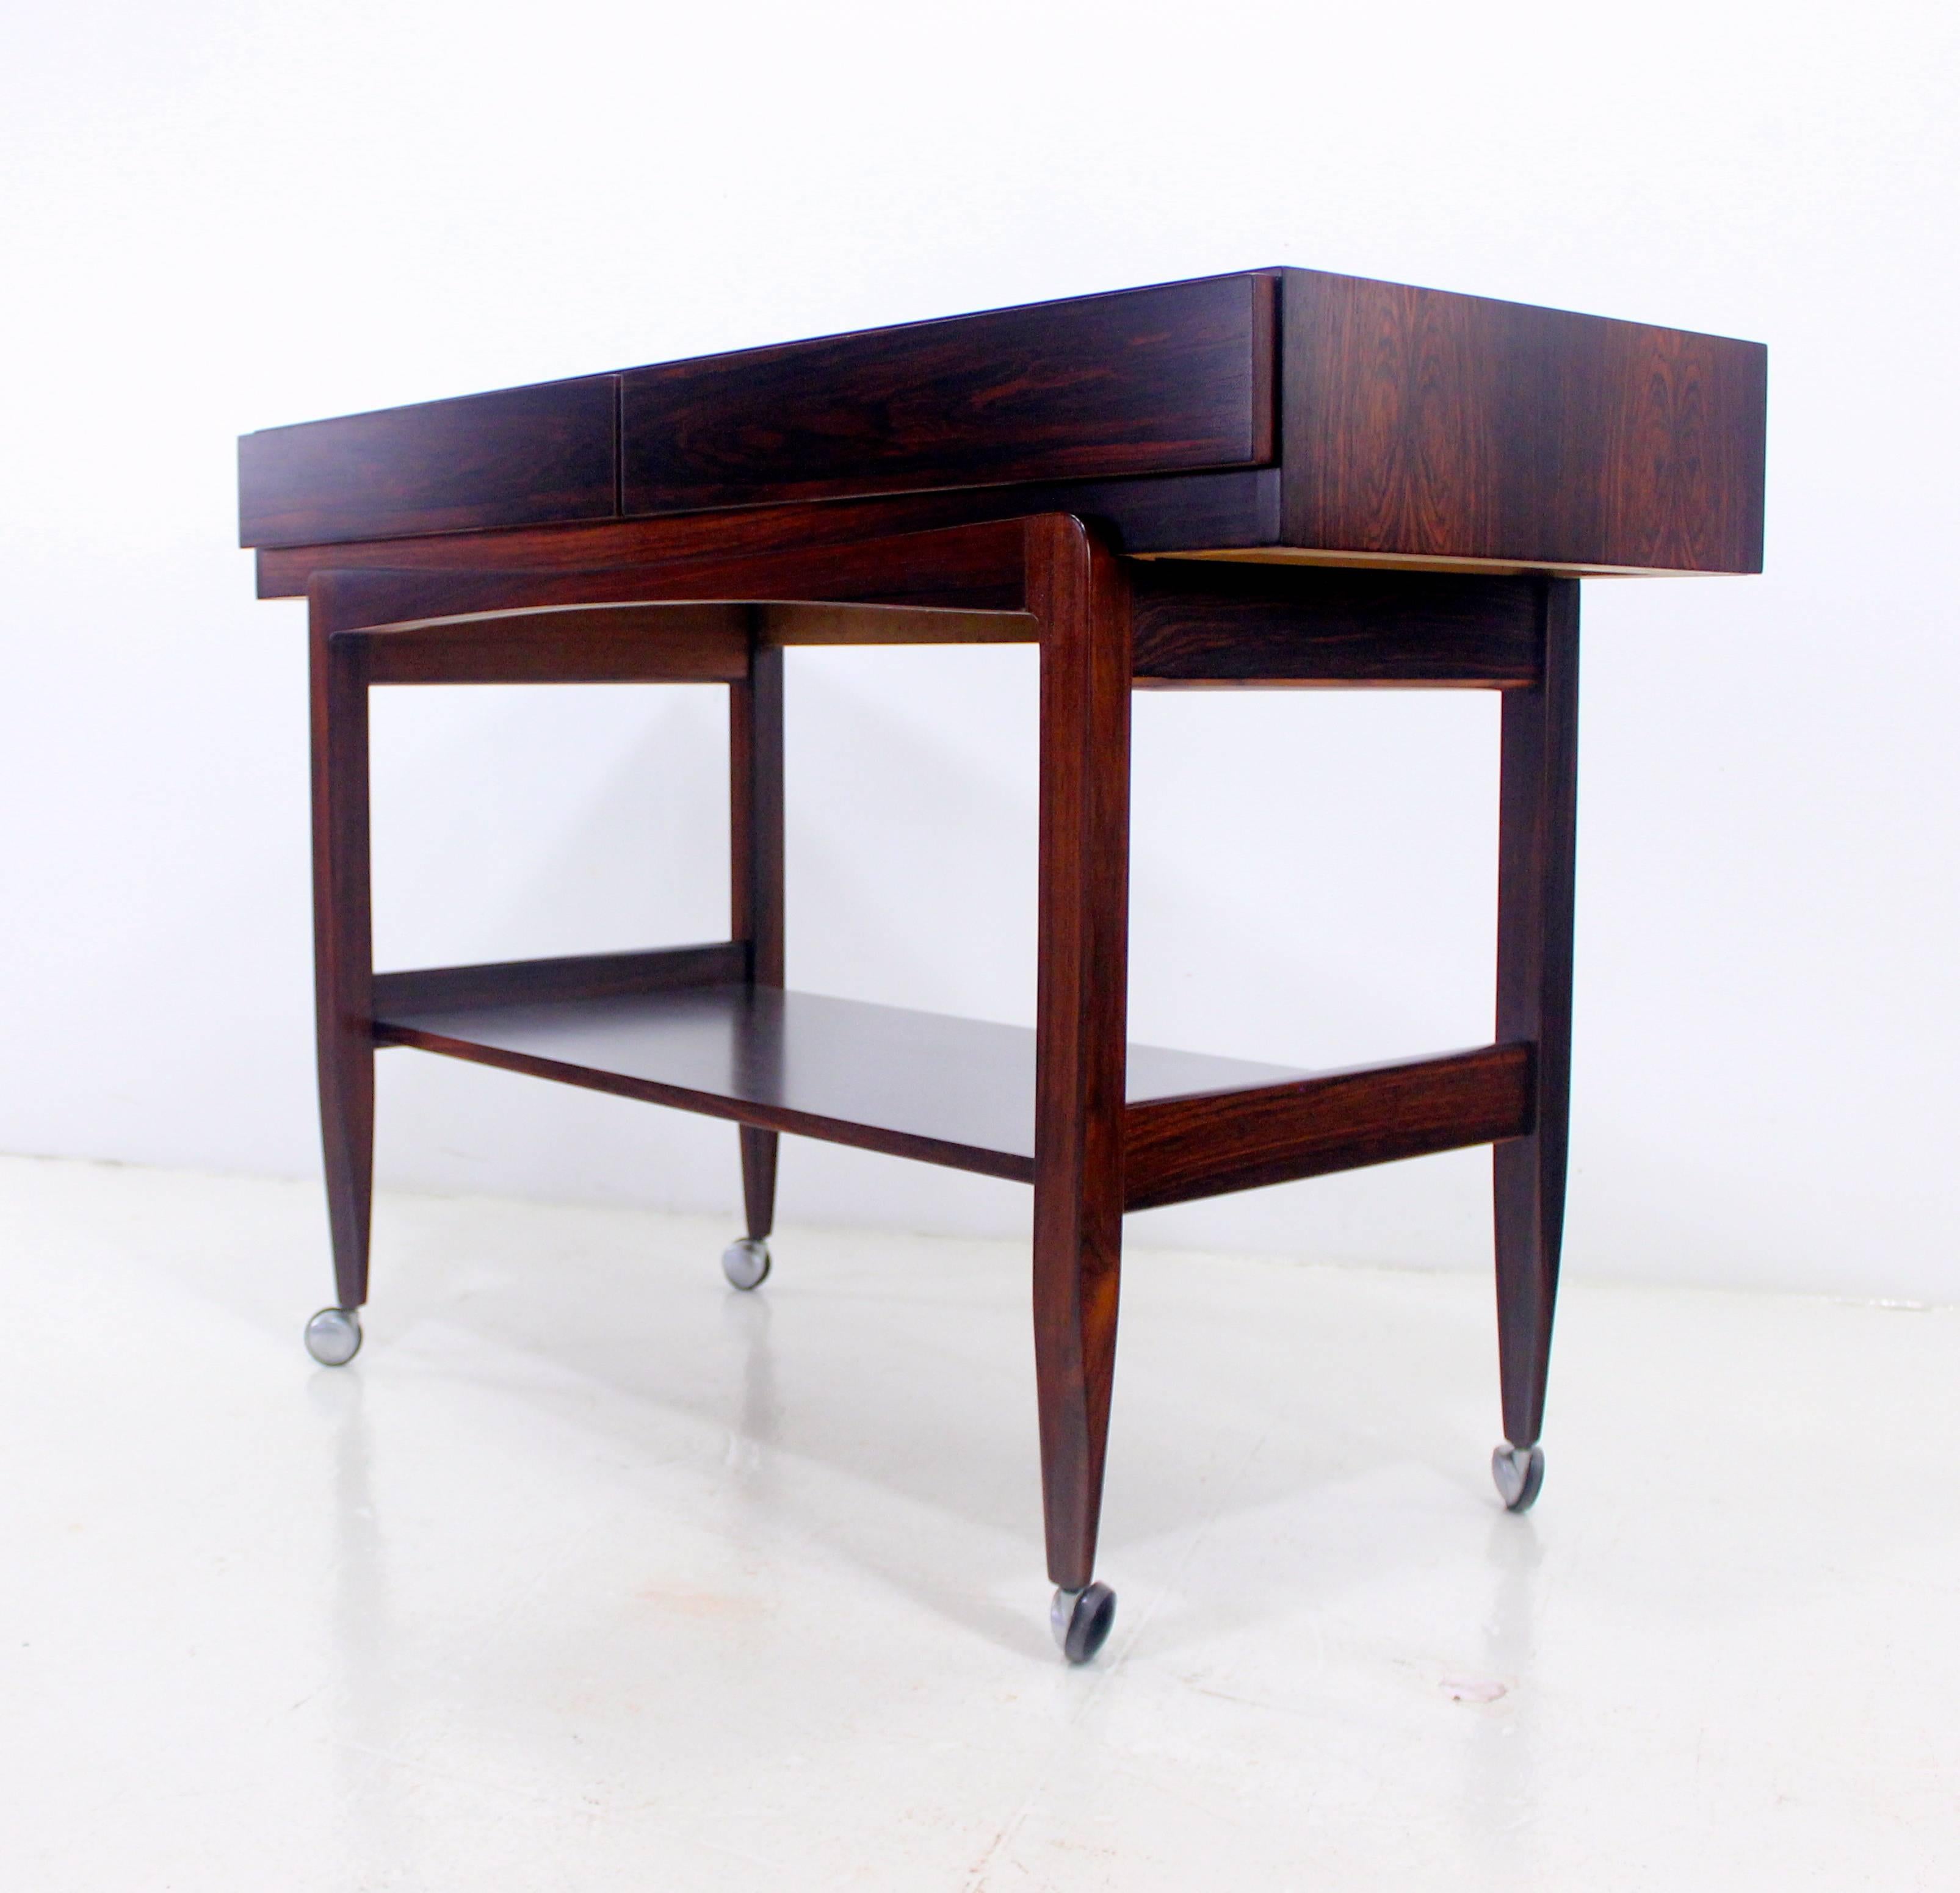 Danish modern console or server designed by Ib Kofod Larsen.
Incredibly rare and illusive.
Rich rosewood.
Floating top with two drawers. Elegantly styled base on wheels.
Finished on the back for 360° use.
Professionally restored and refinished